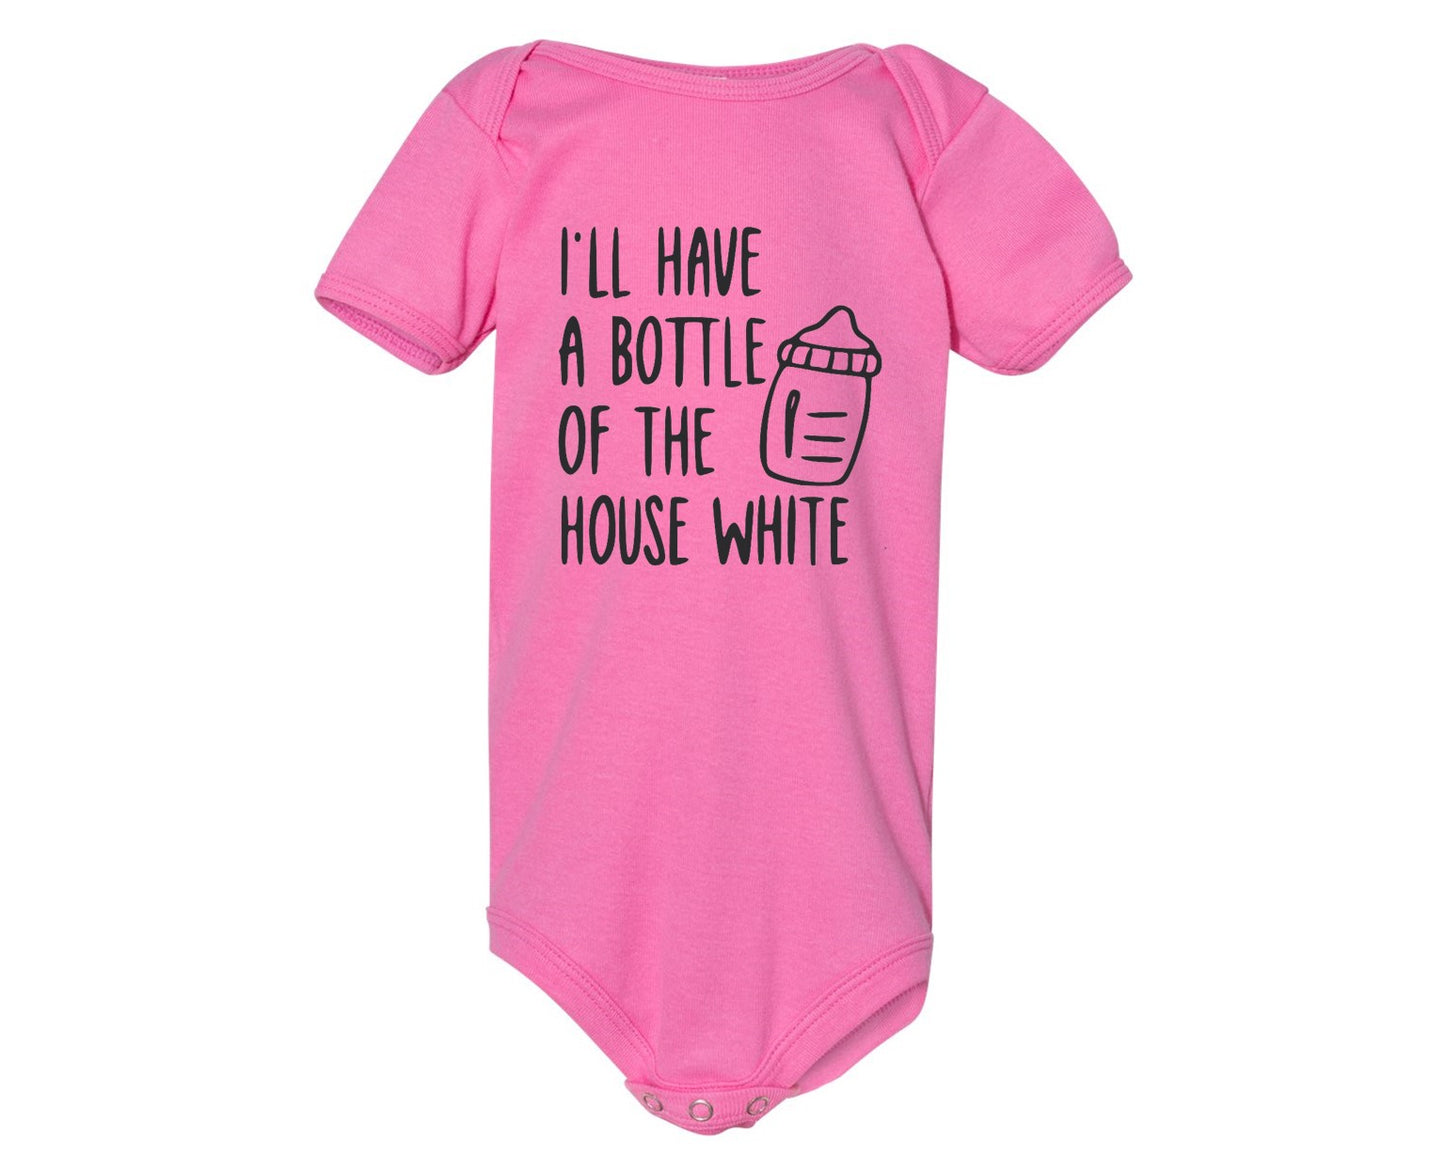 Baby One Piece Bodysuit - I'll have the House White